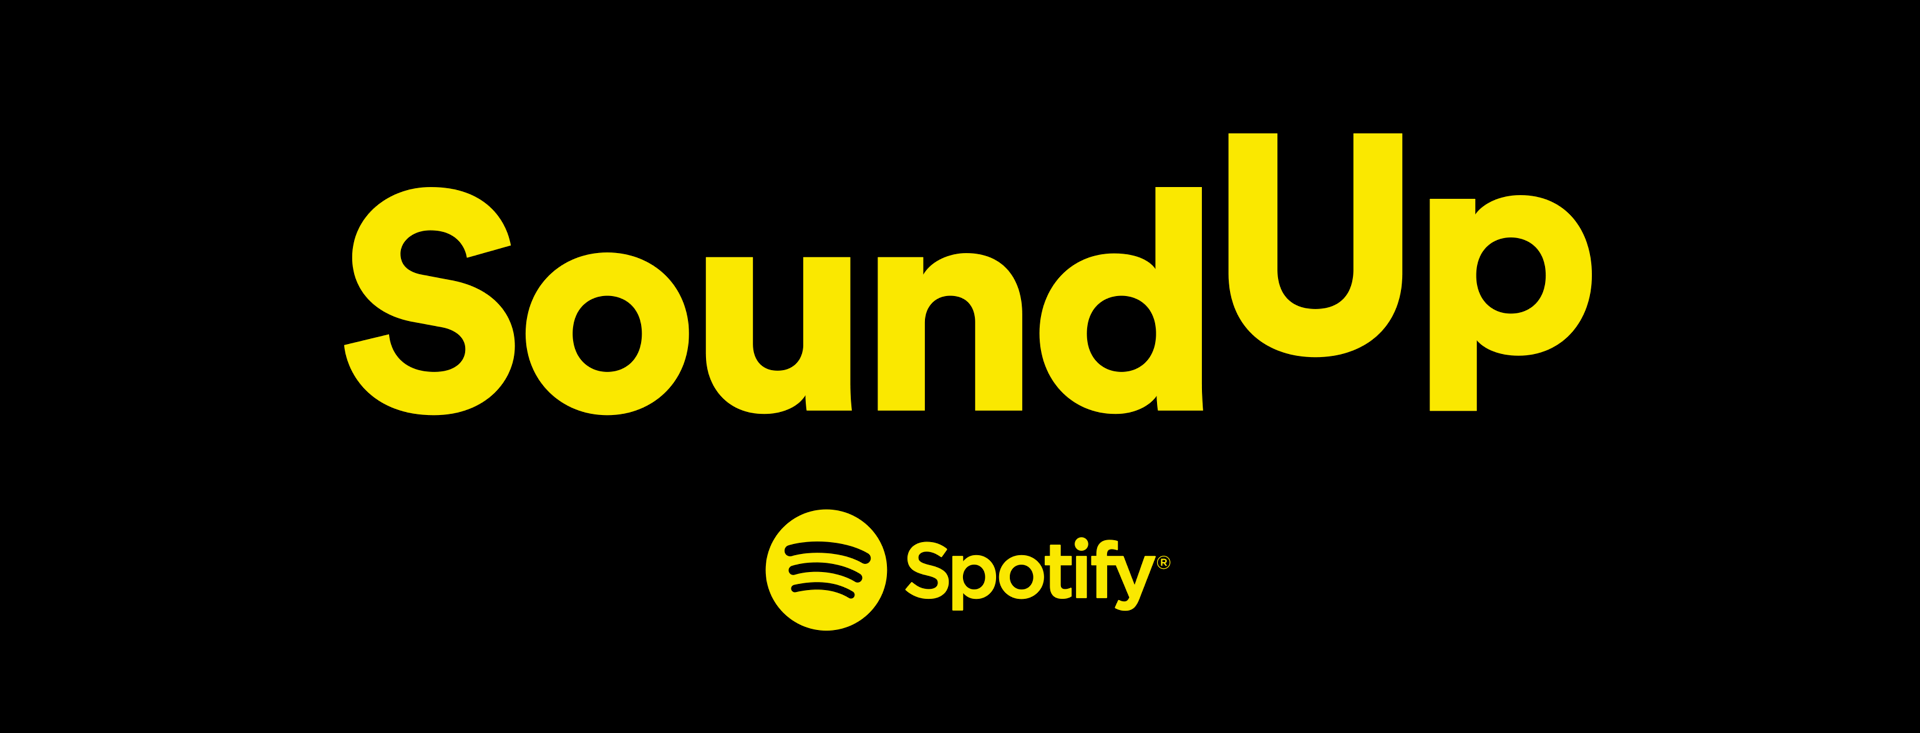 Spotify’s Sound Up program helps “underrepresented podcasters” around the world boost their content